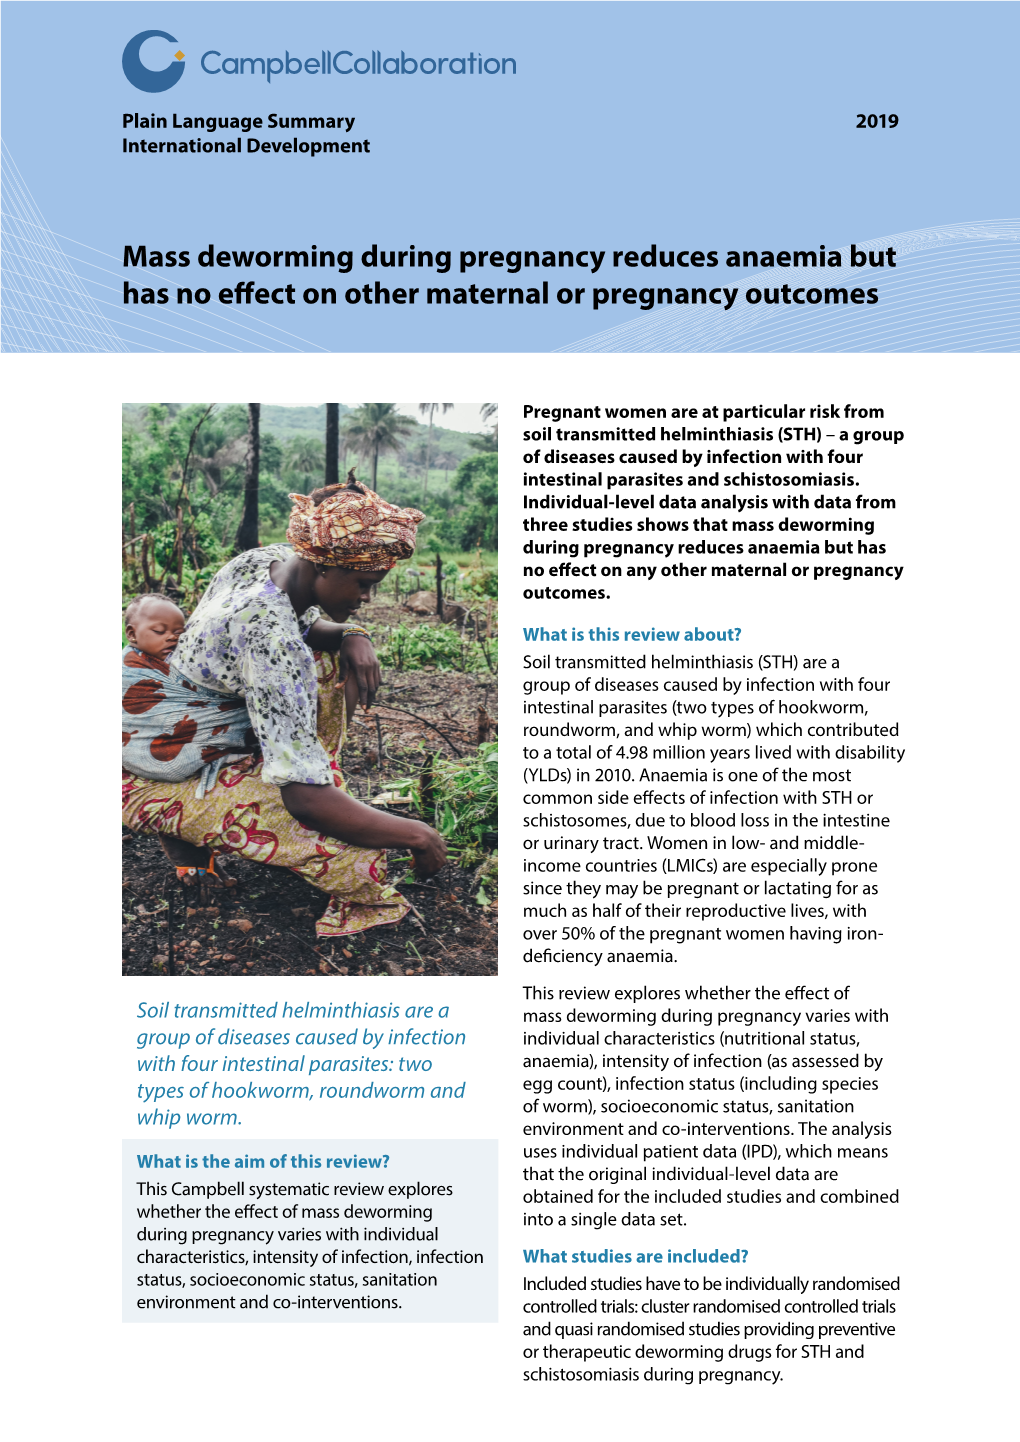 Mass Deworming During Pregnancy Reduces Anaemia but Has No Effect on Other Maternal Or Pregnancy Outcomes